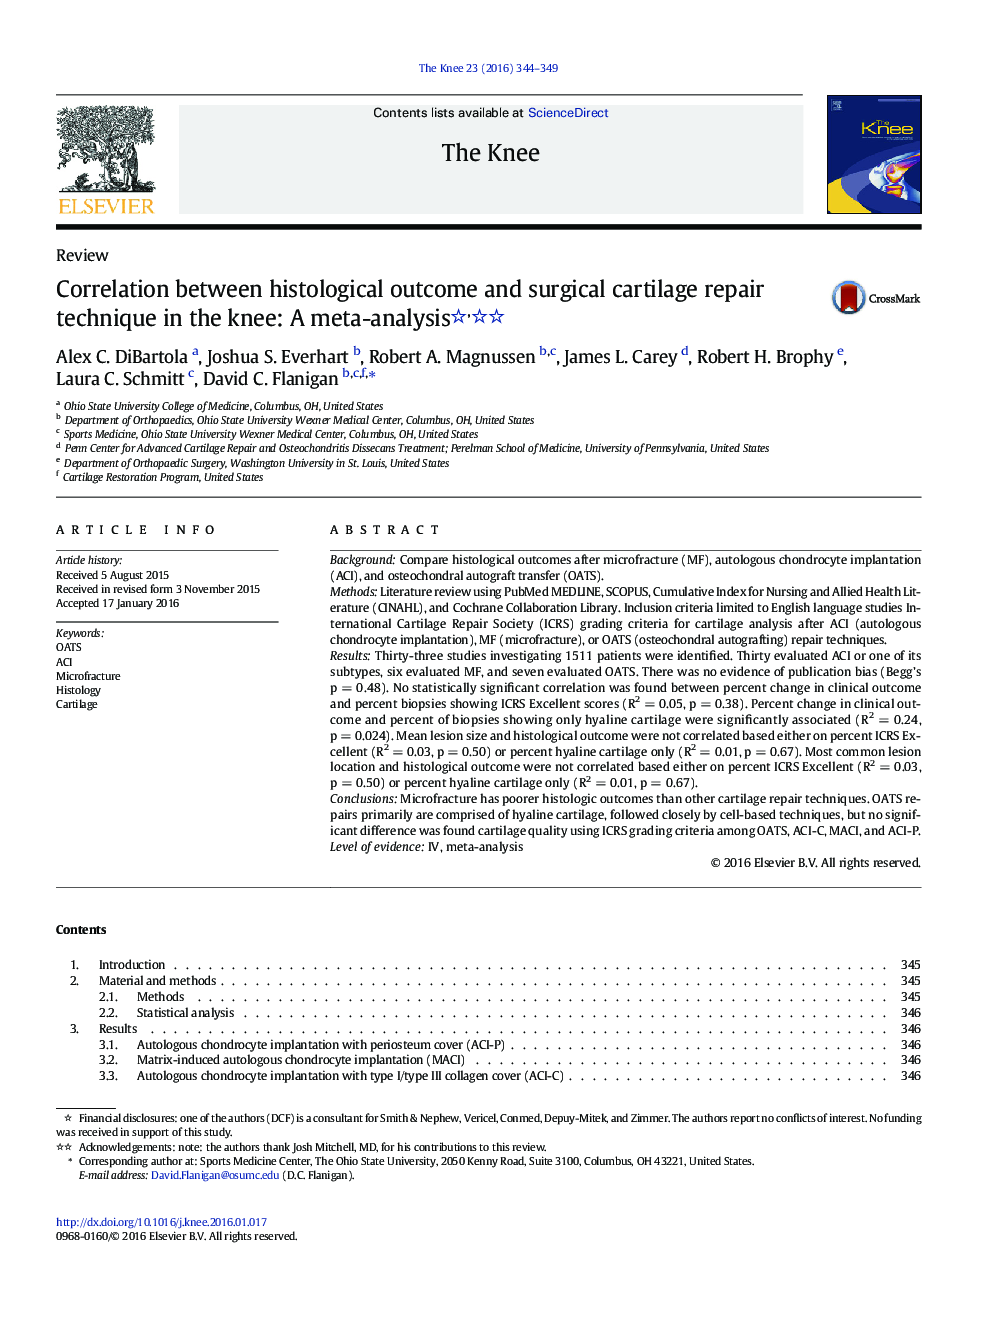 ReviewCorrelation between histological outcome and surgical cartilage repair technique in the knee: A meta-analysis